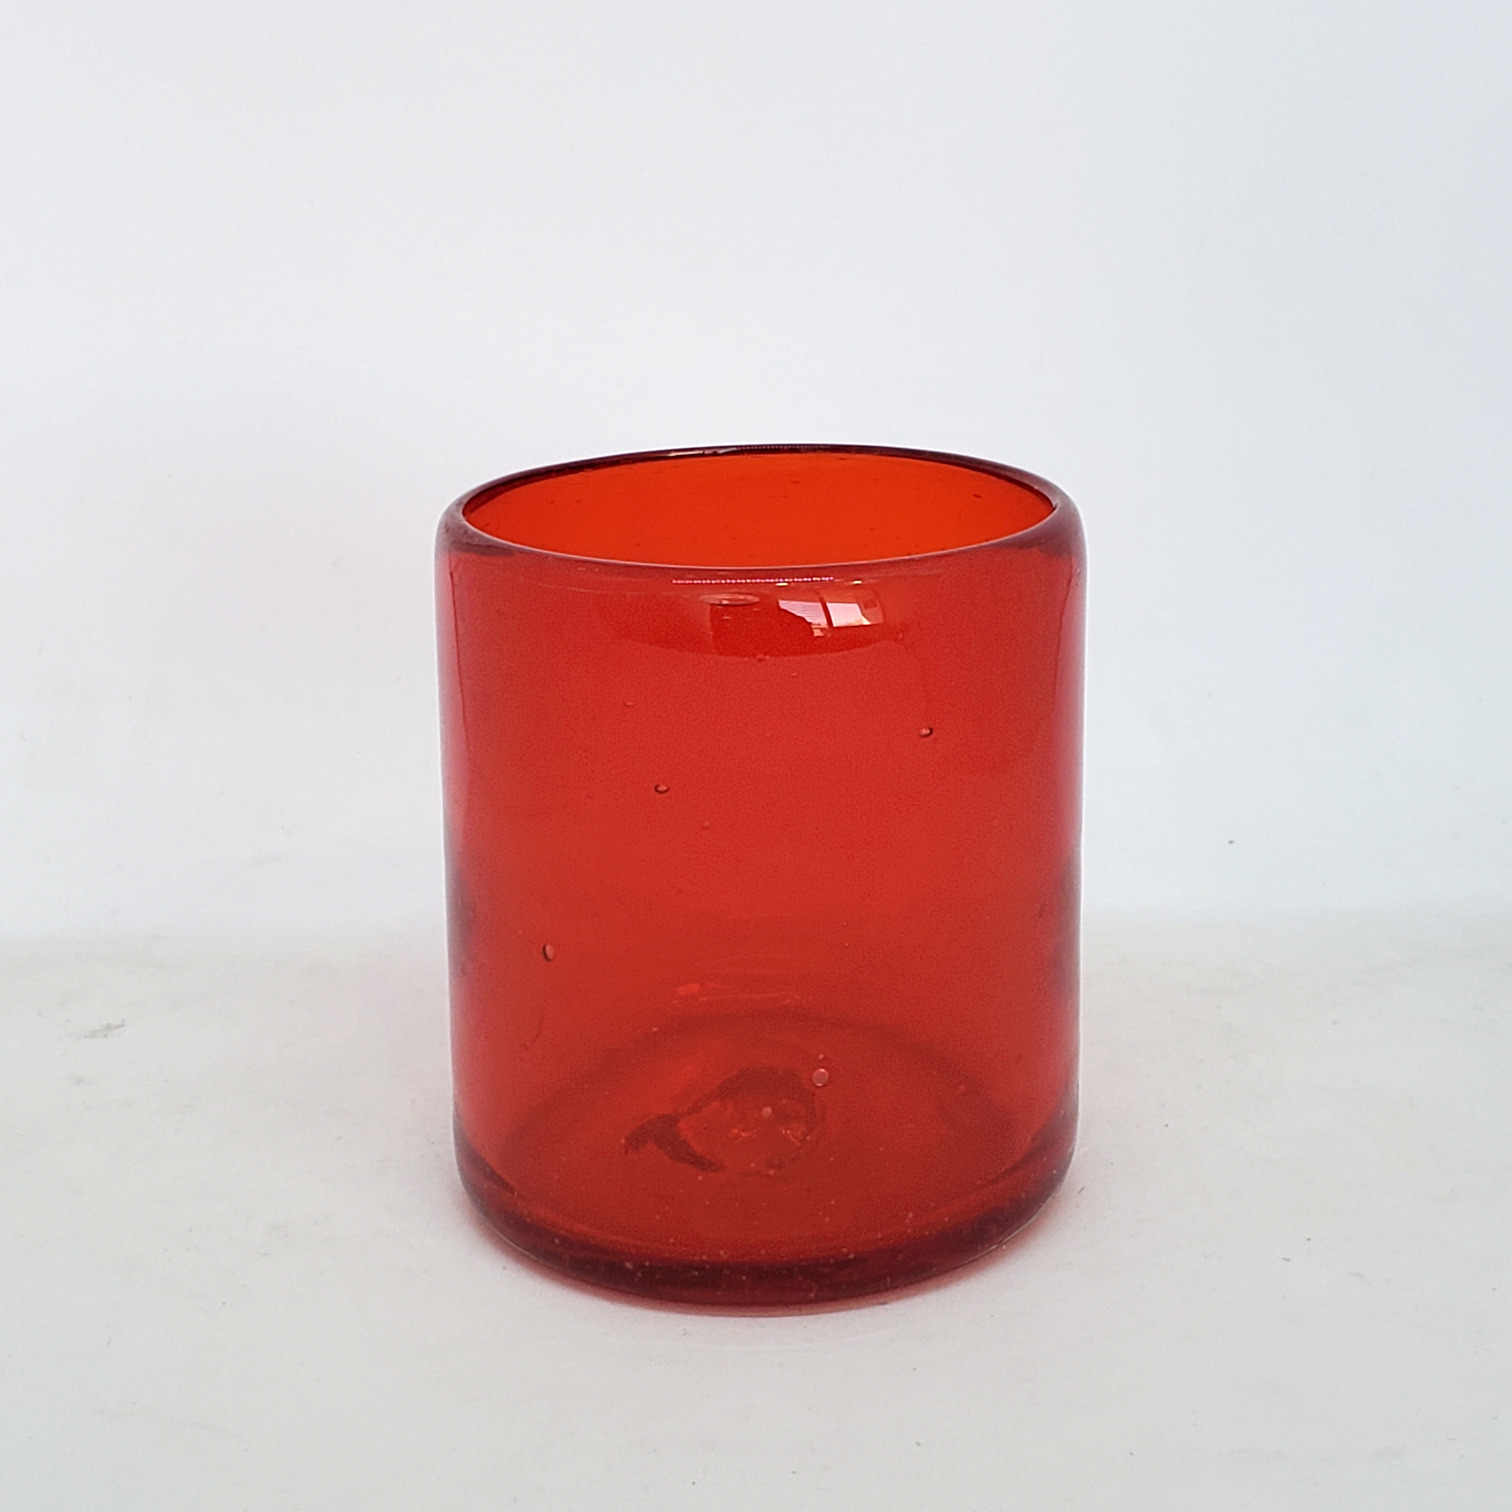 Wholesale Mexican Glasses / Solid Ruby Red 9 oz Short Tumblers  / Enhance your favorite drink with these colorful handcrafted glasses.